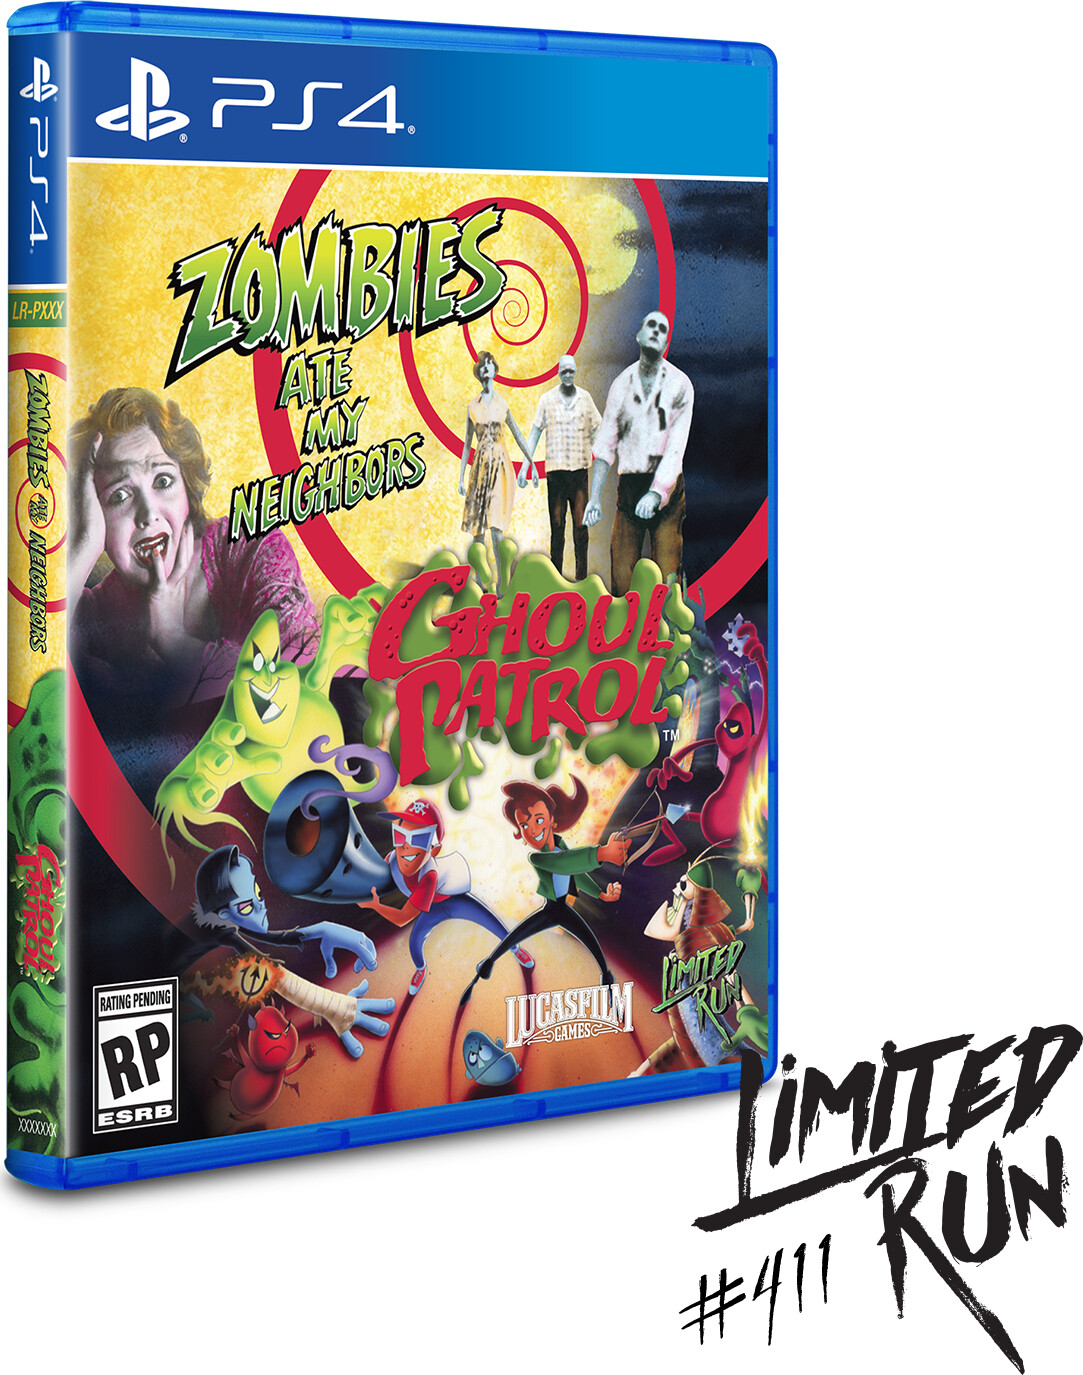 Se Zombies Ate My Neighbors & Ghoul Patrol (limited Run #414) (import) - PS4 hos Gucca.dk